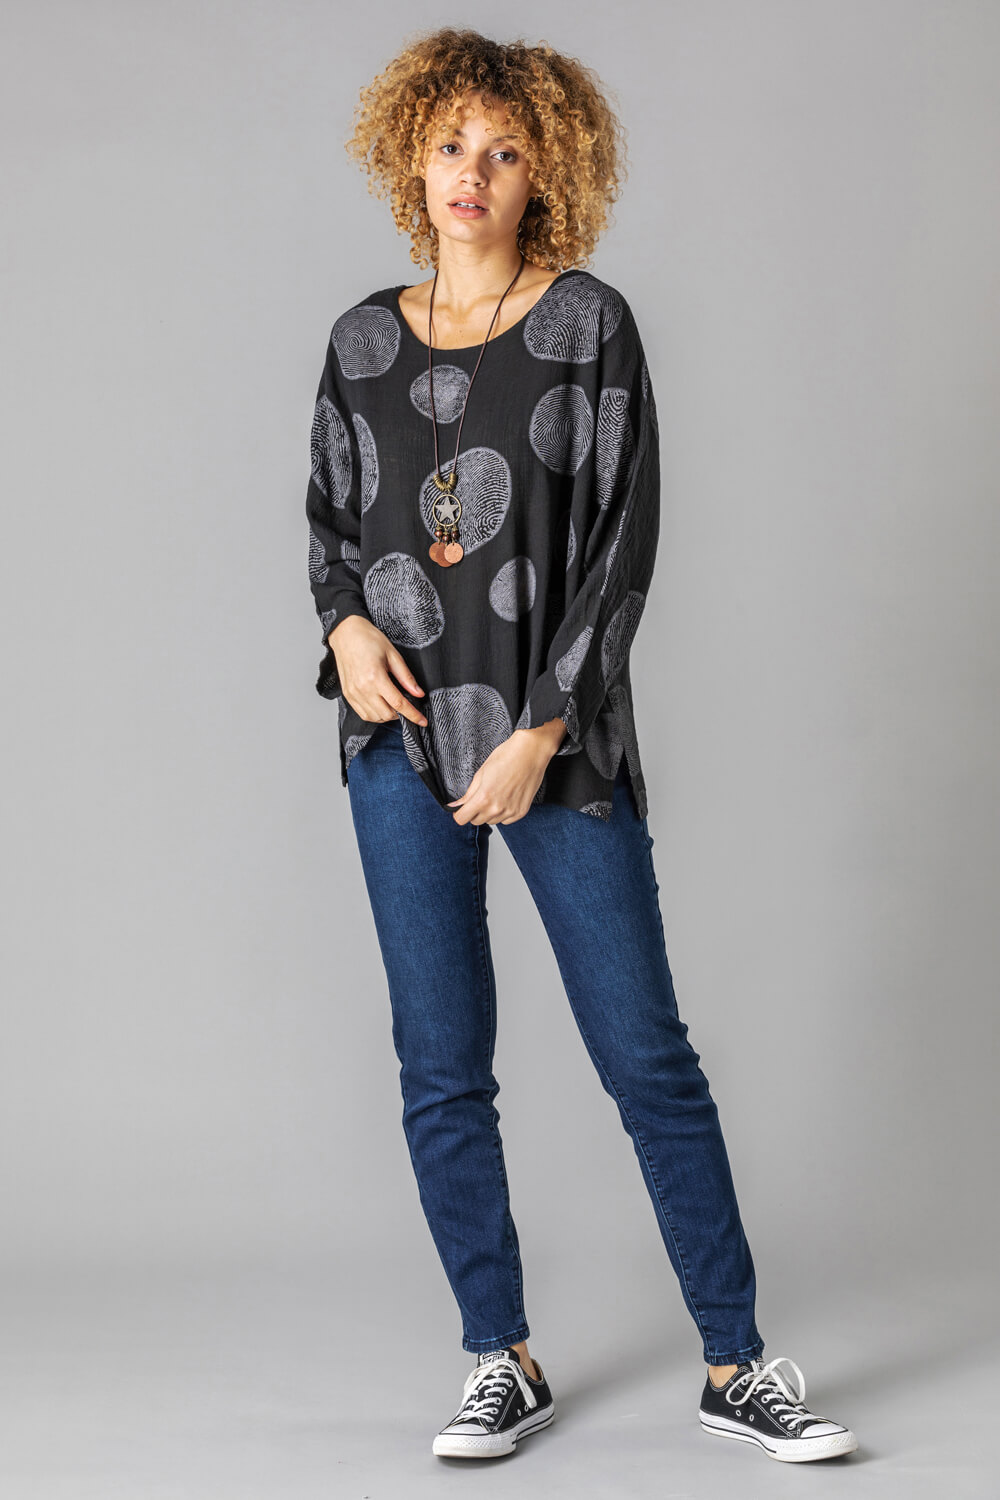 Black Spot Print Top with Necklace, Image 2 of 4